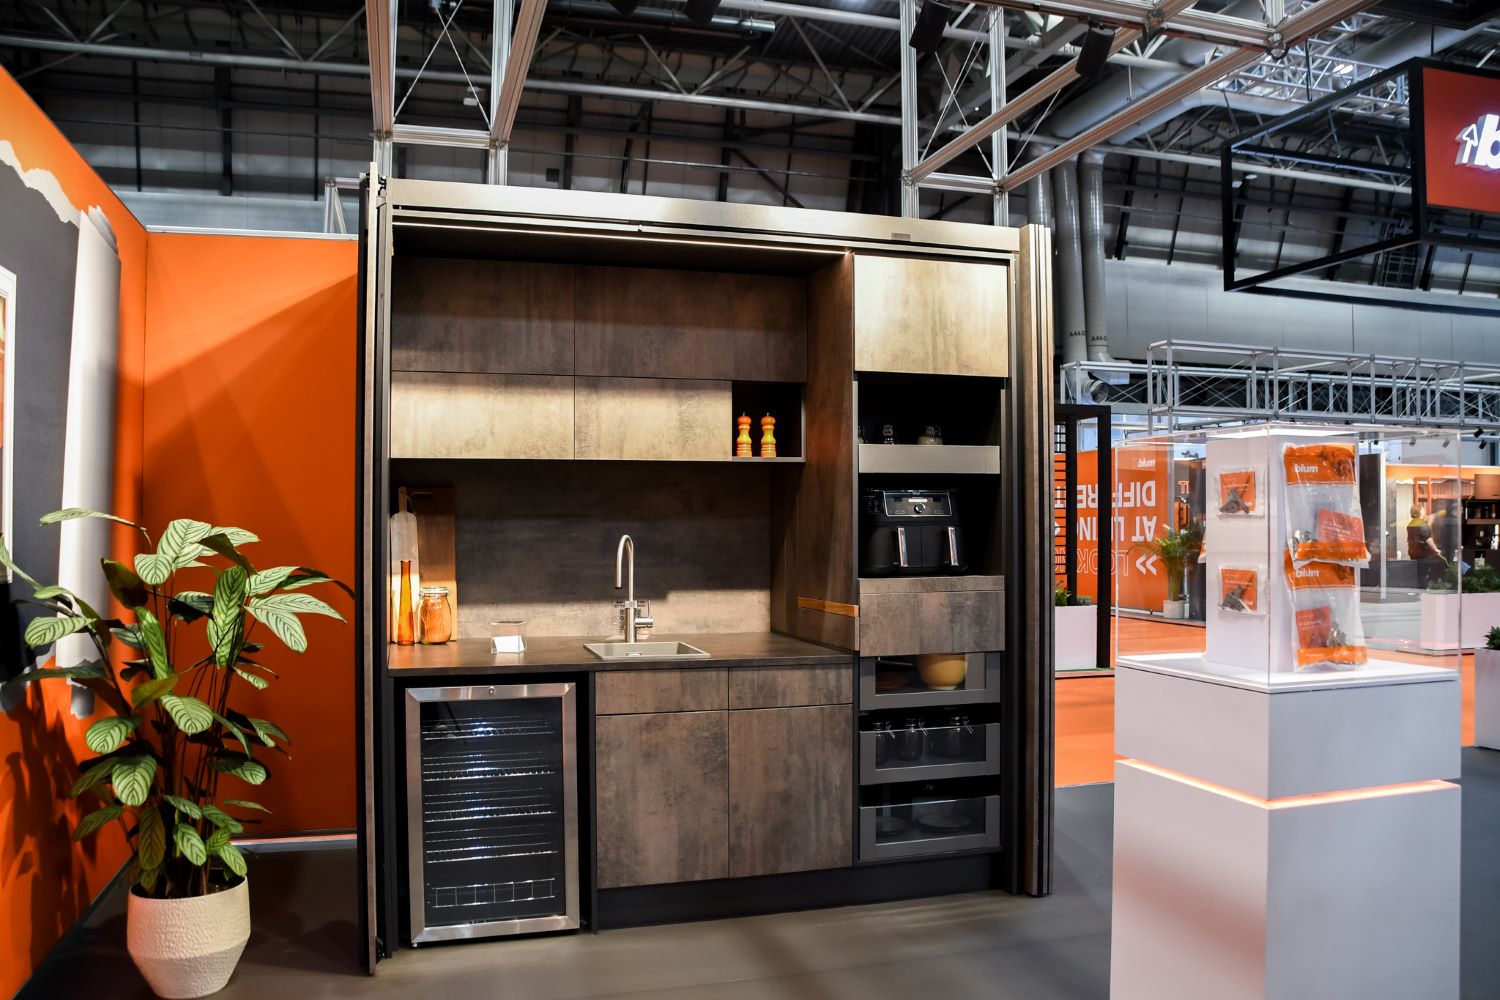 Blum showcased its 22 square metre concept home designed to embrace the trend for urban, one-space living.